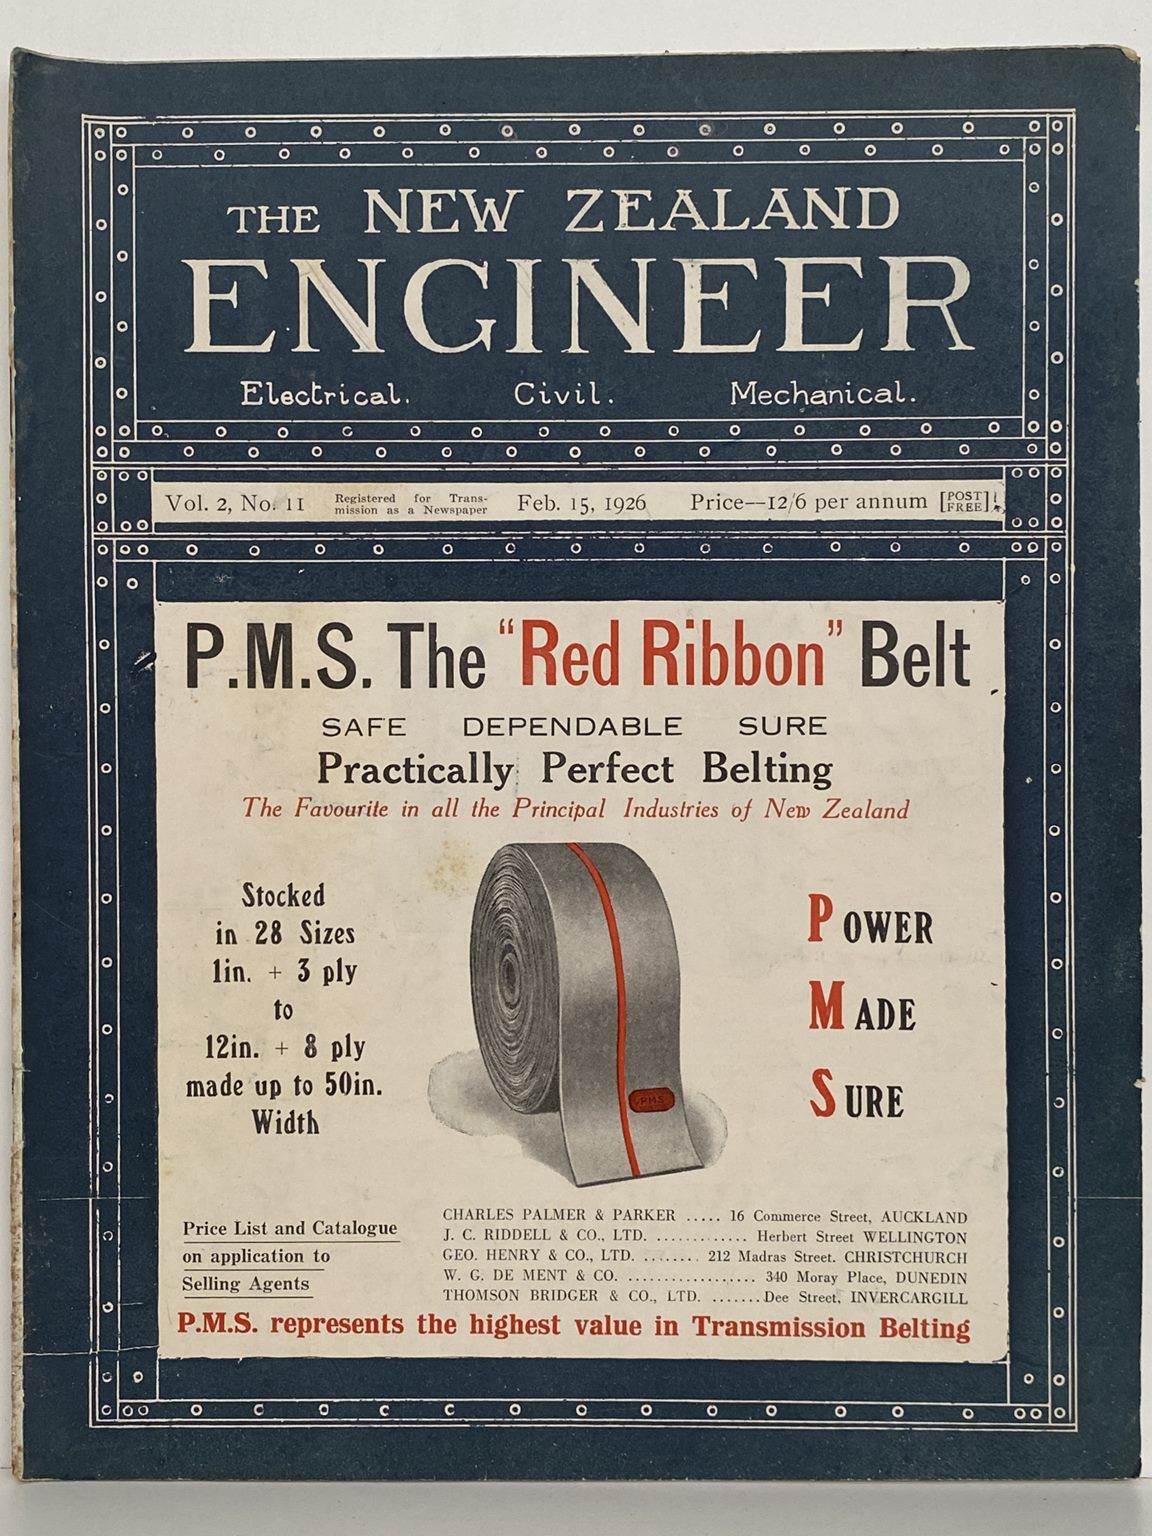 OLD MAGAZINE: The New Zealand Engineer Vol. 2, No. 11 - 15 February 1926